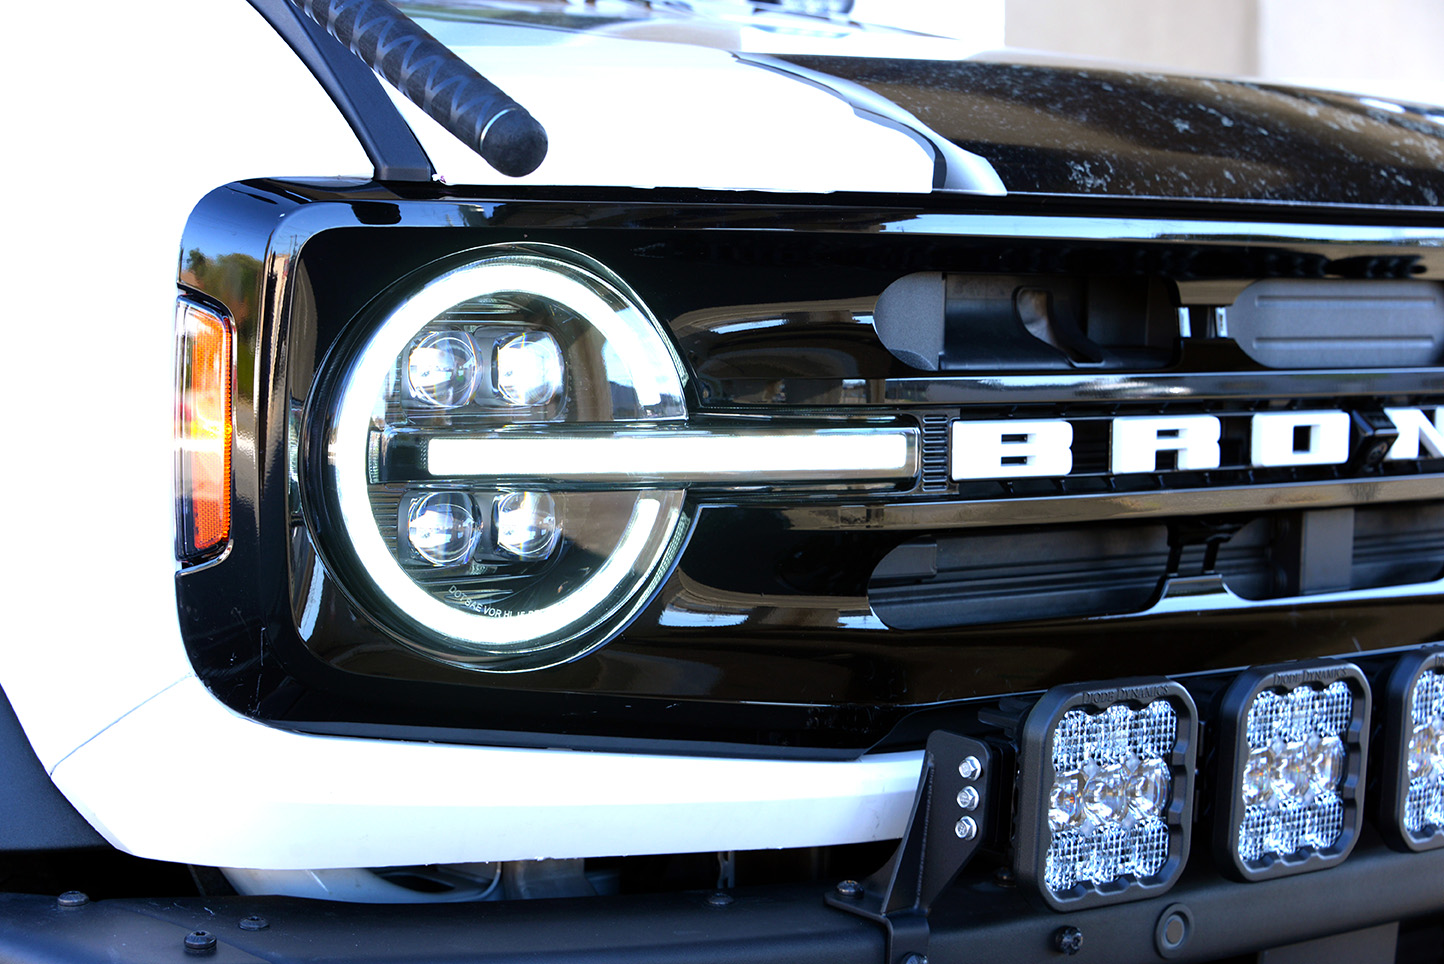 Ford Bronco Form Lighting Headlights | ONLY $899! | FREE SHIPPING 4 (small)